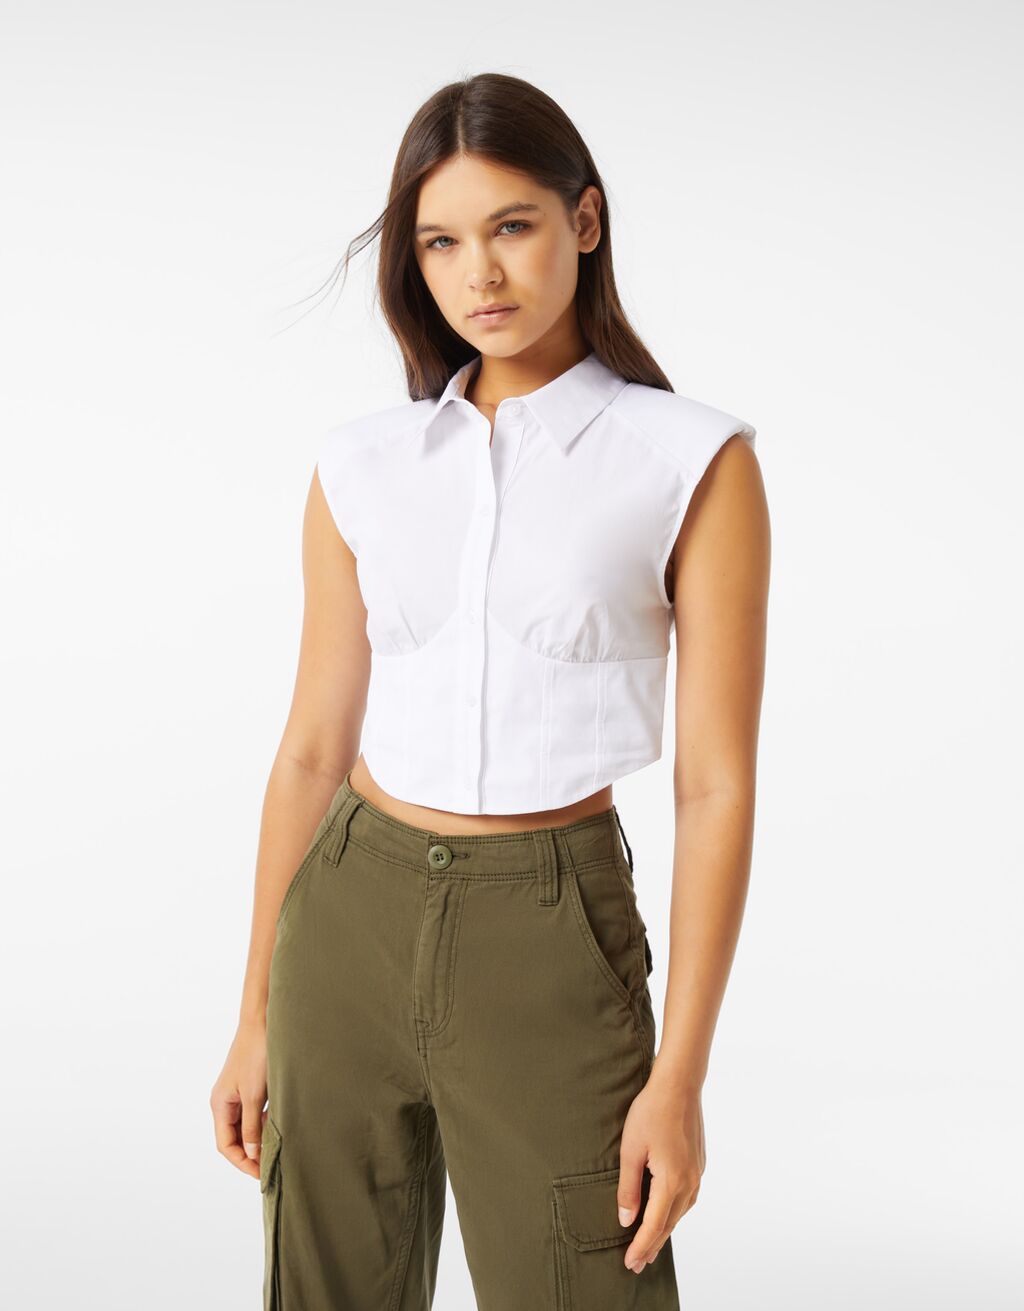 Sleeveless poplin corsetry-inspired shirt with shoulder pads